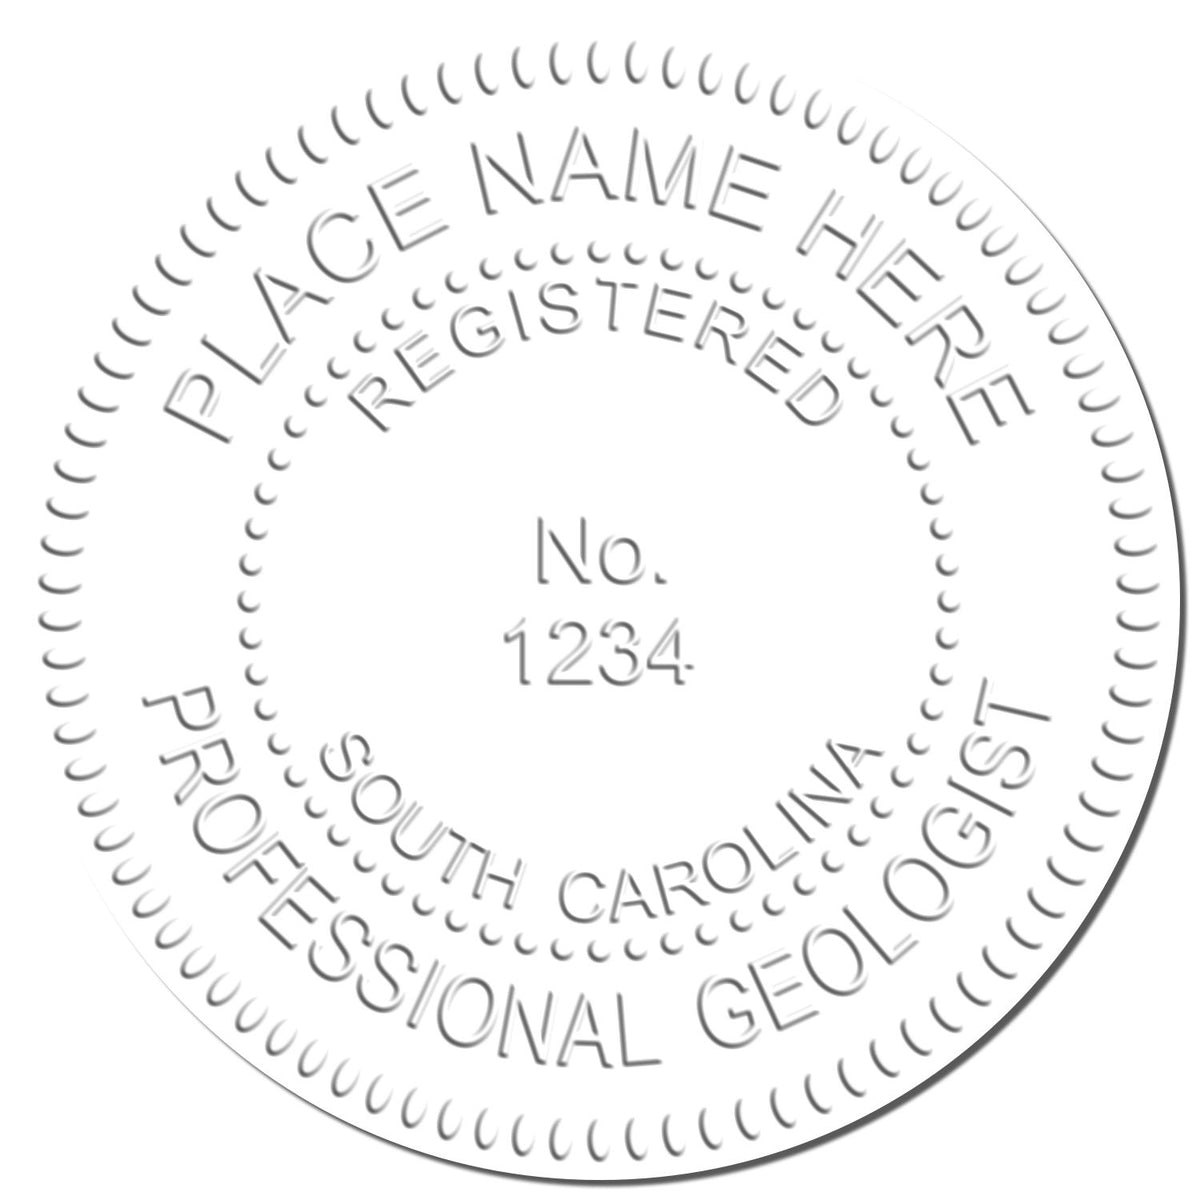 This paper is stamped with a sample imprint of the Handheld South Carolina Professional Geologist Embosser, signifying its quality and reliability.